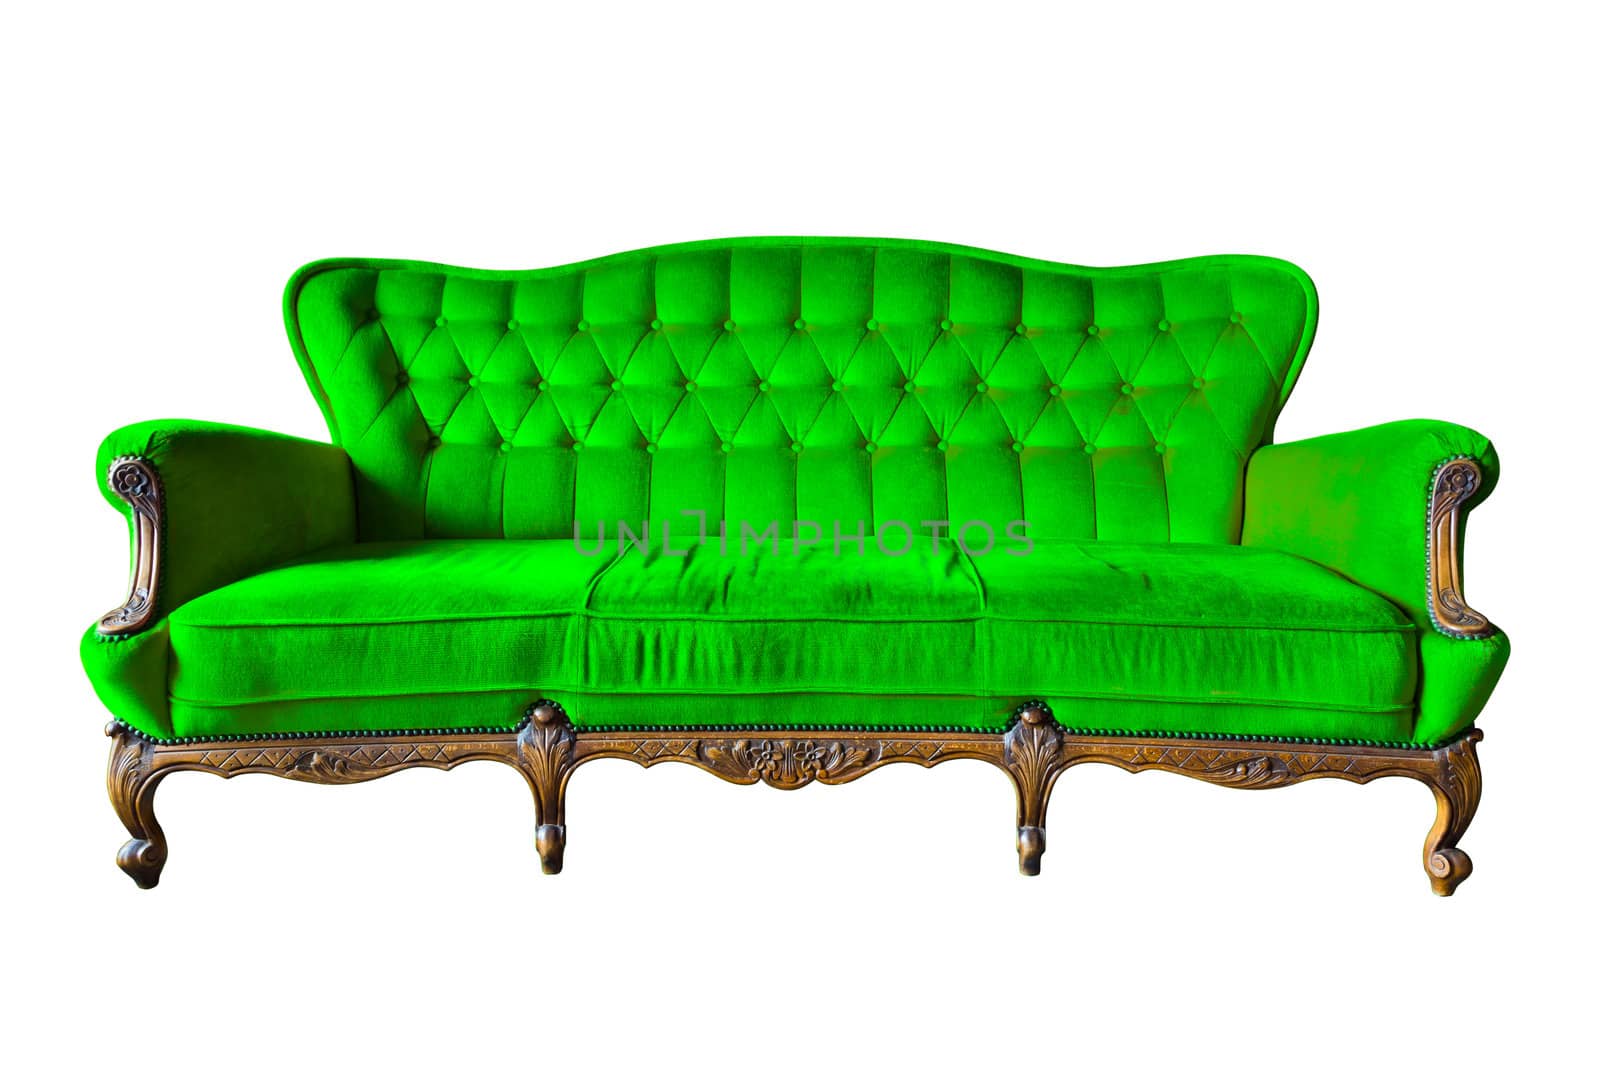 vintage green luxury armchair isolated with clipping path by tungphoto